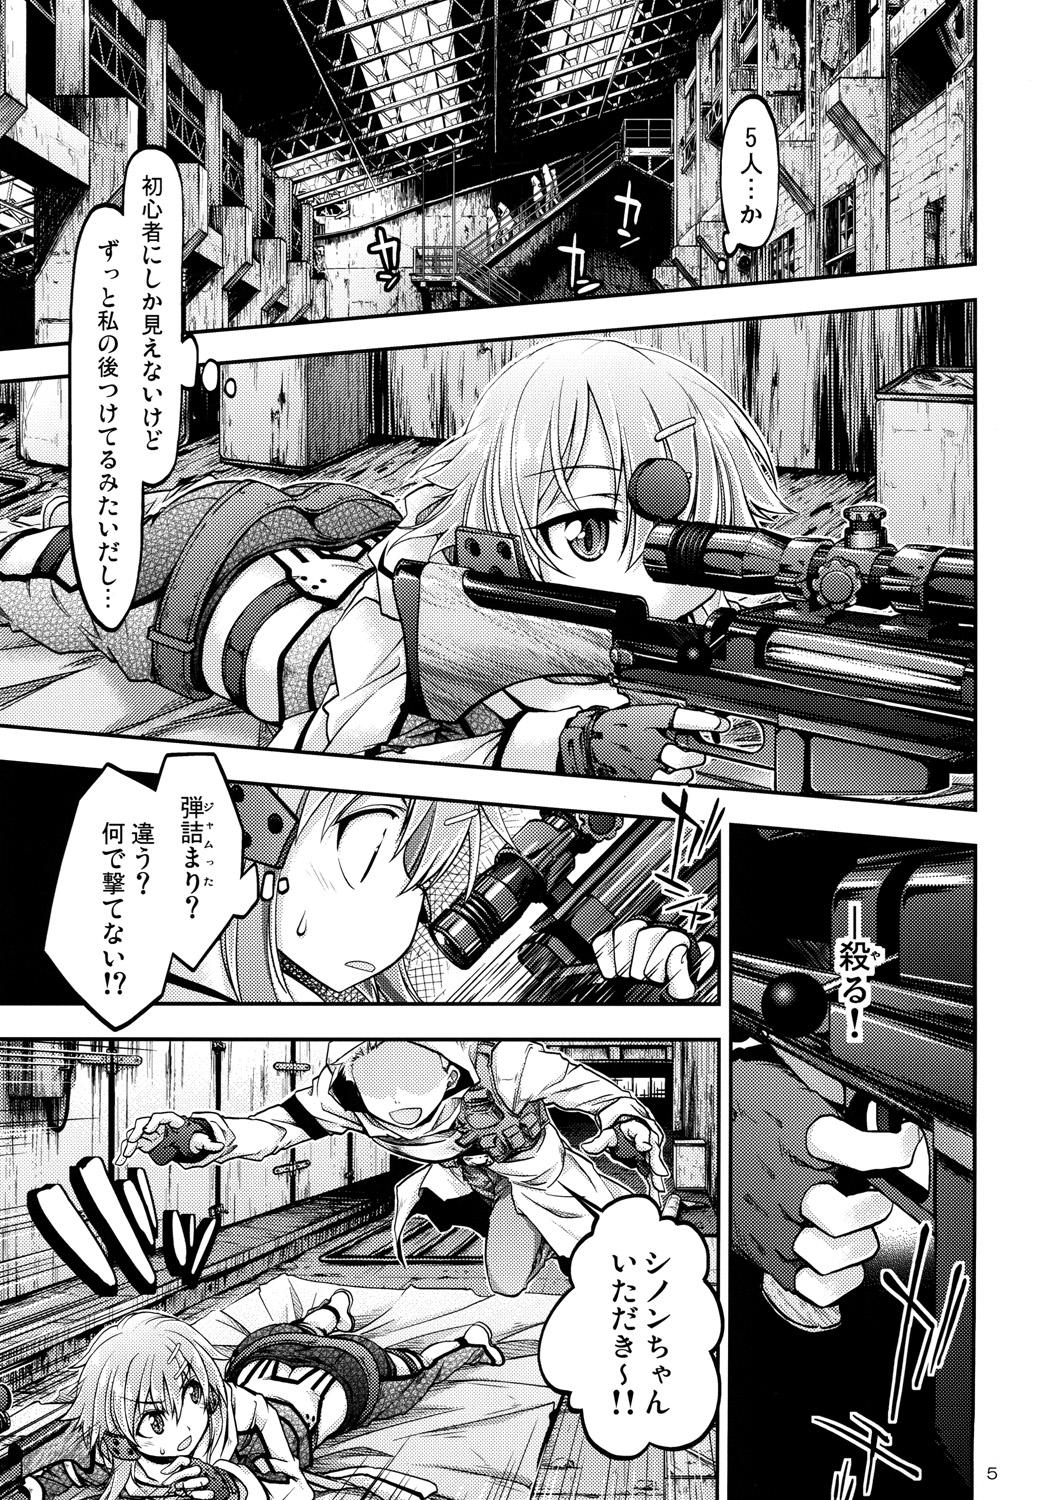 Moaning Gspot - Sword art online Gonzo - Page 4